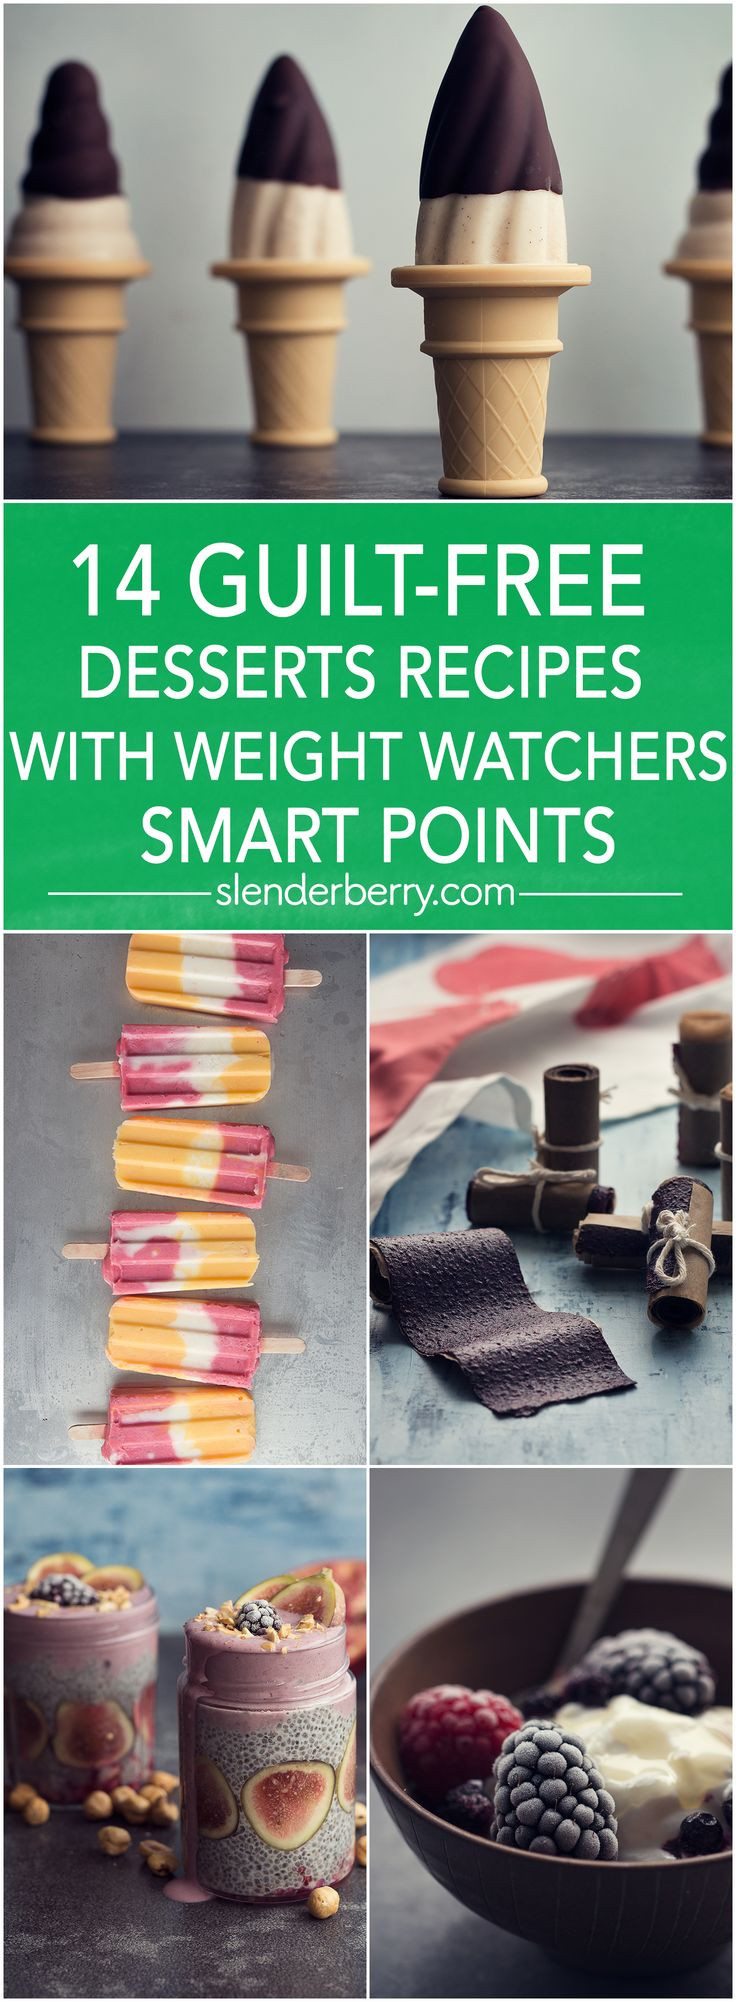 Weight Watchers Smart Points Desserts
 best images about Scrumptious Desserts and Sweets